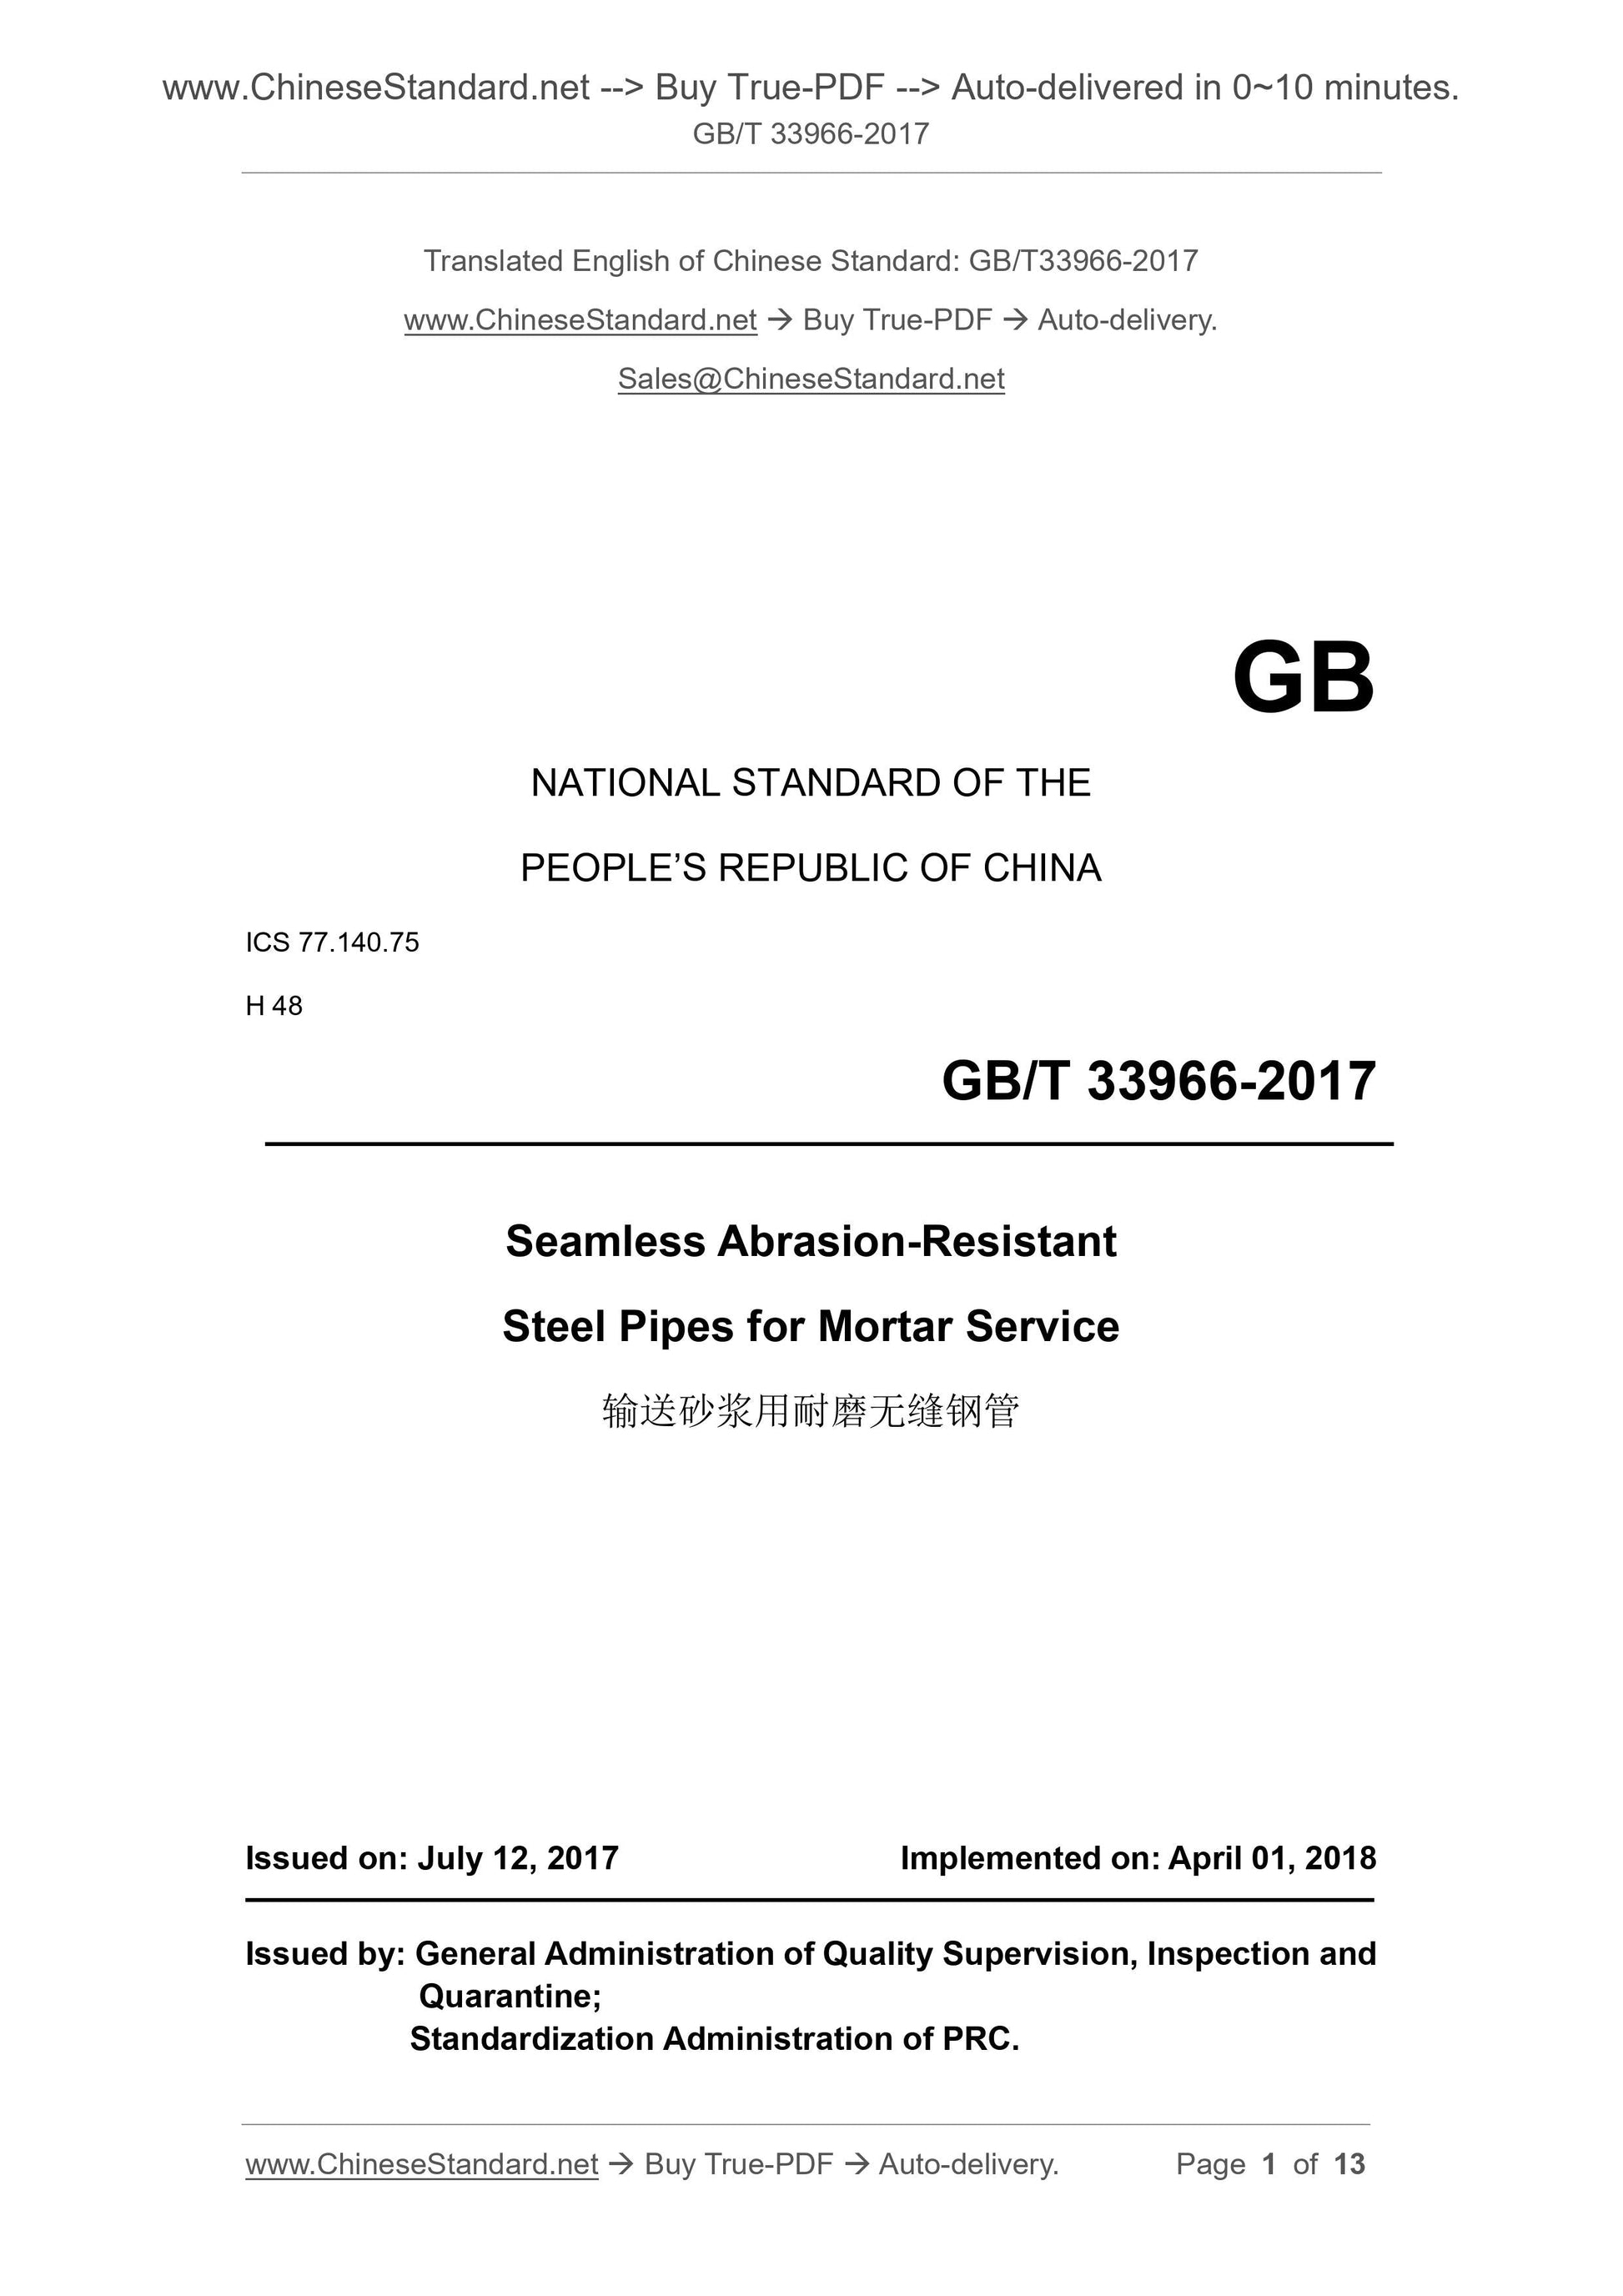 GB/T 33966-2017 Page 1